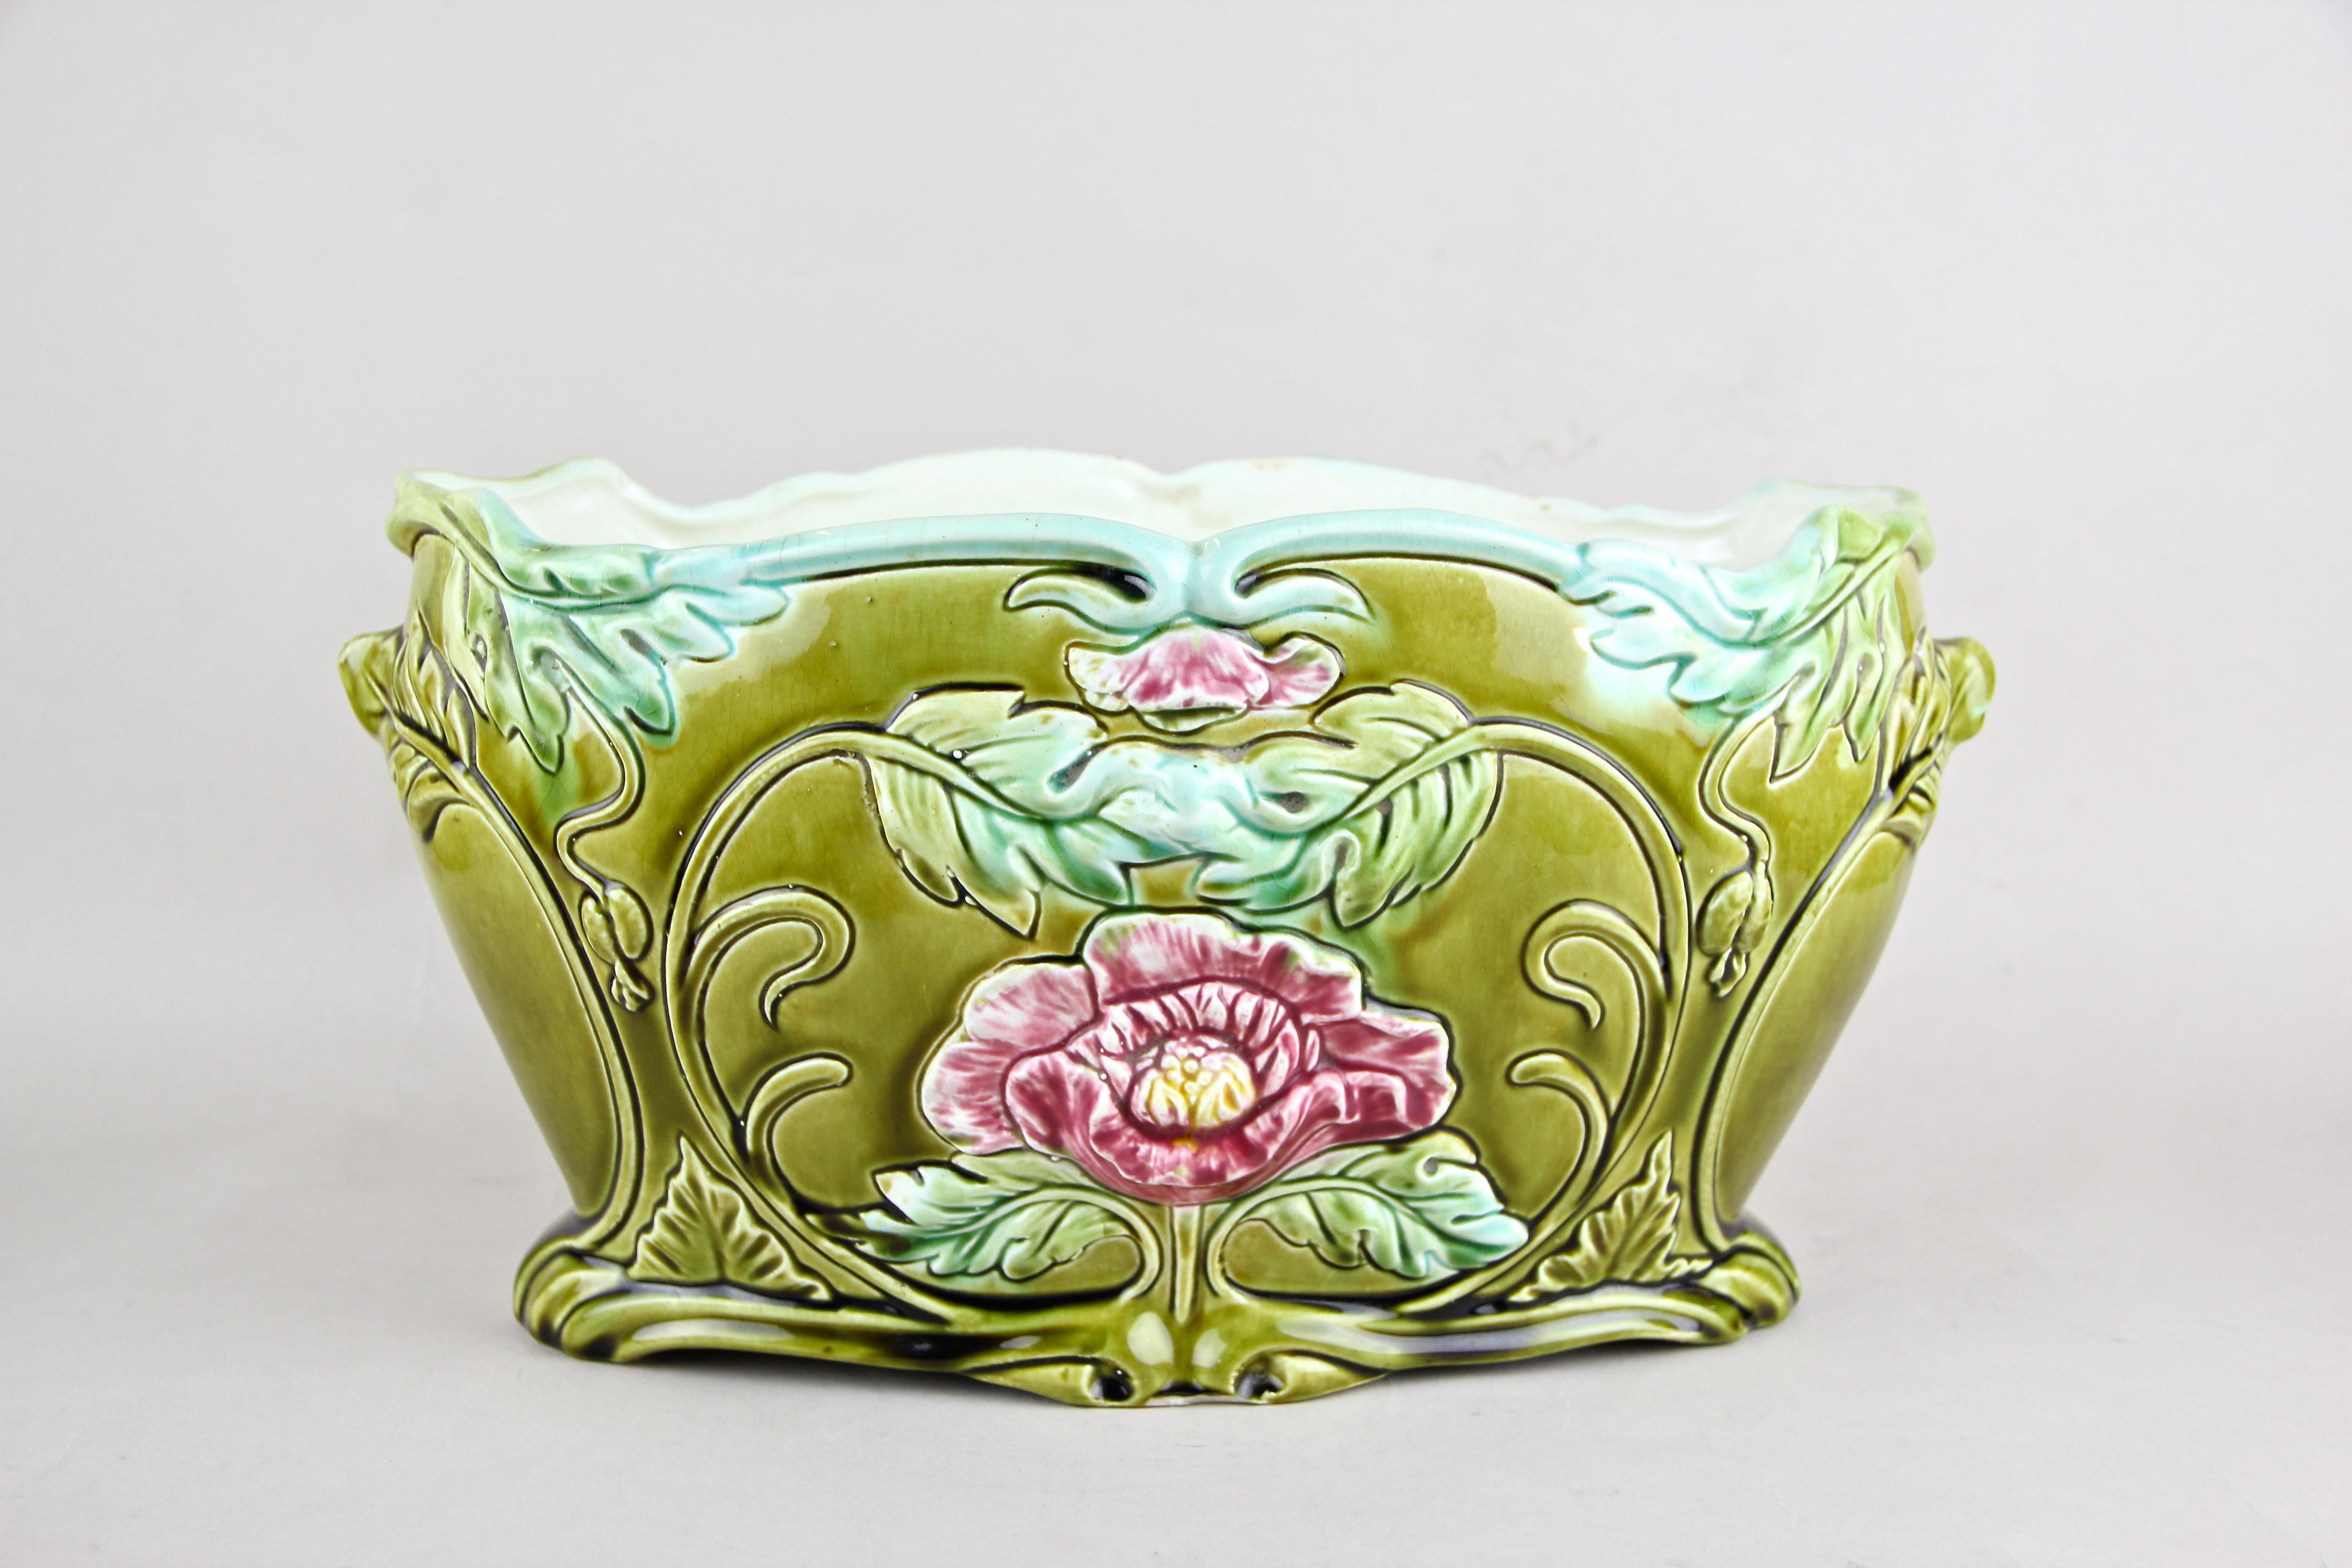 Fantastic ceramic planter or jardinière from France, circa 1910. This floral designed planter or jardinière just looks fantastic in combination with the wonderful worked blossoms on the front and the back. A great coloring and the unique shape makes